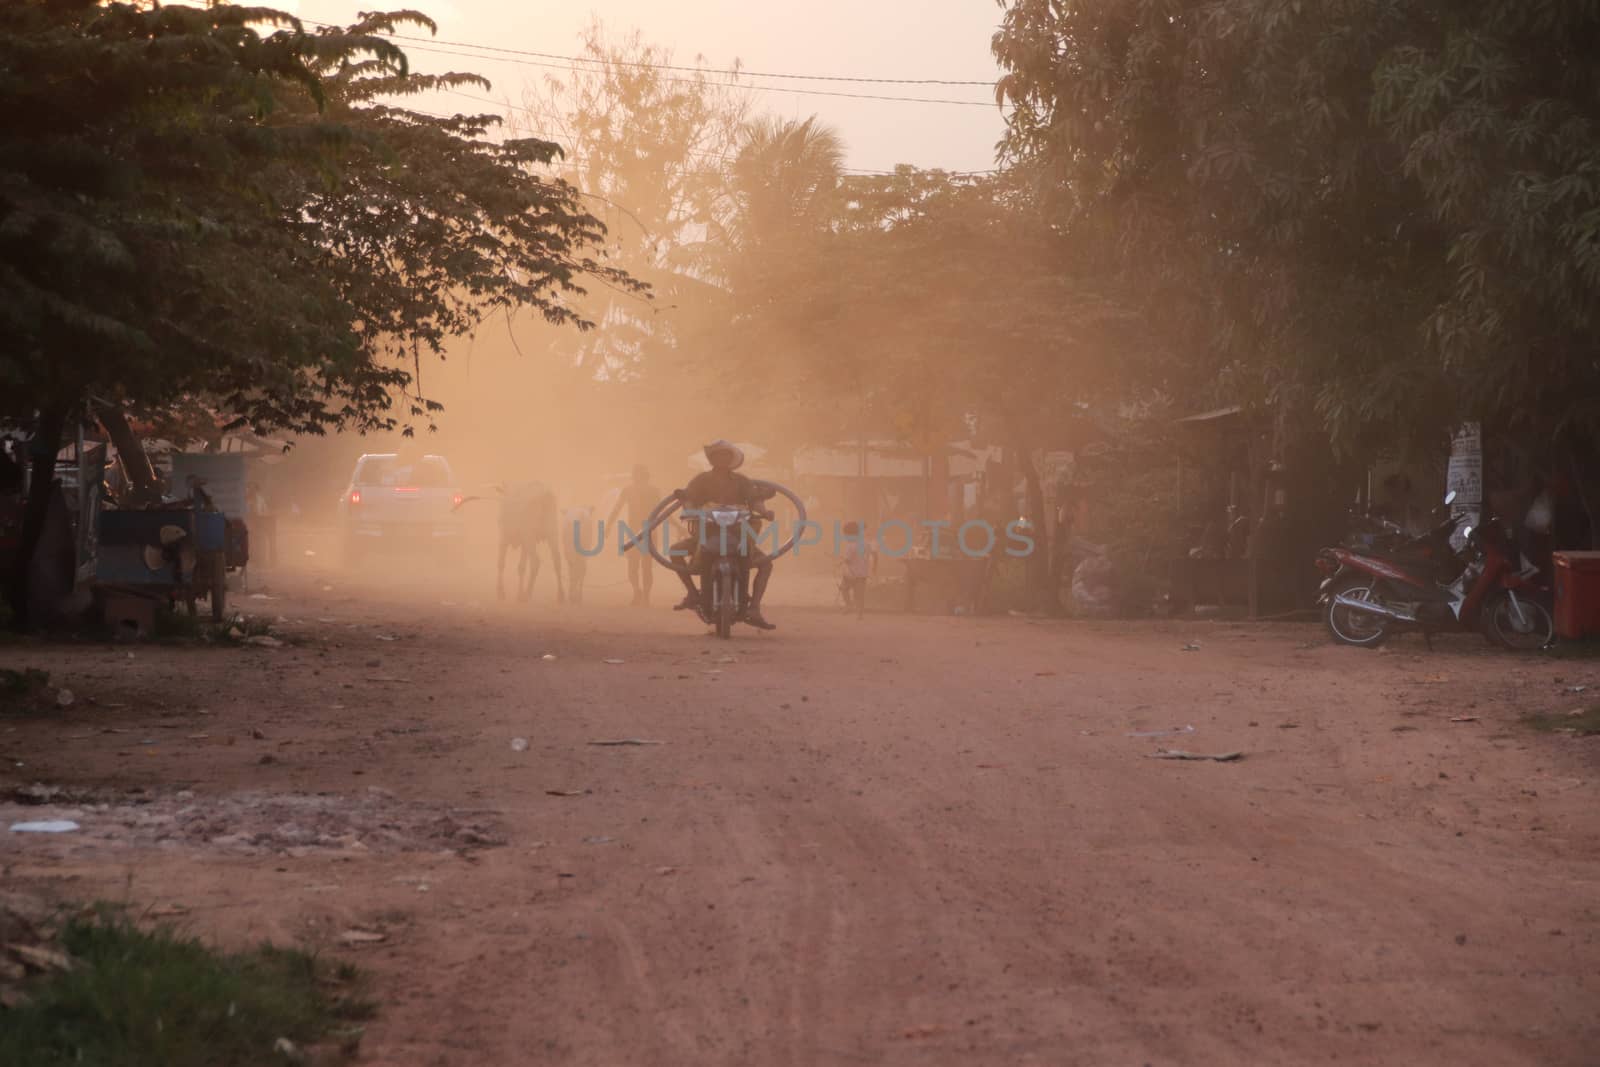 Motorbike driving on a dusty dirt road in the remote countryside of Cambodia